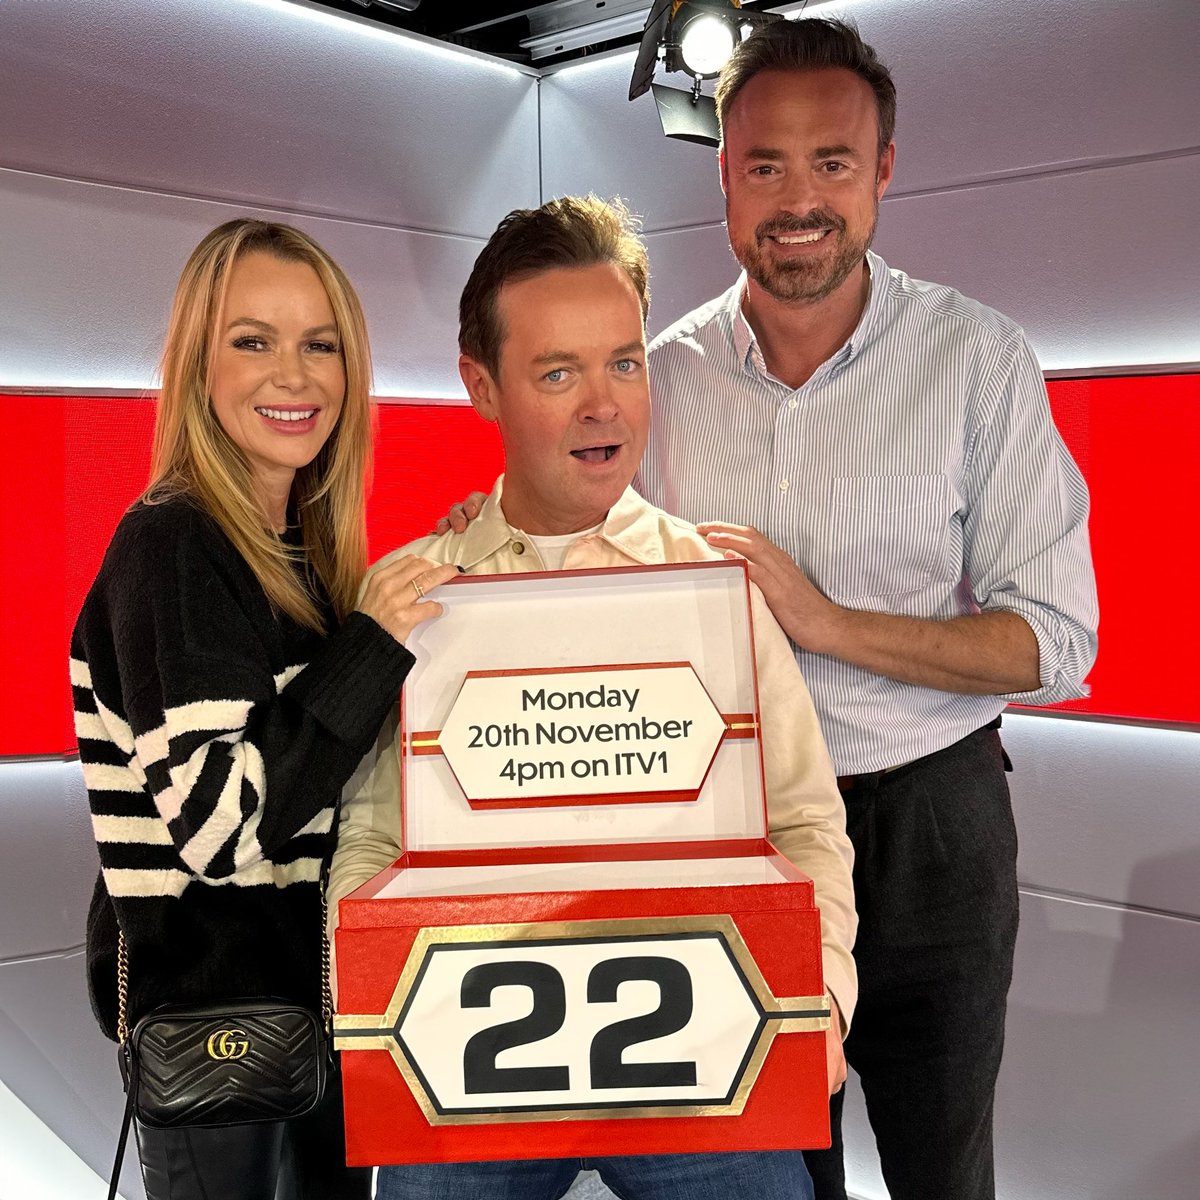 . @AmandaHolden & @JamieTheakston look excited about the new series! How excited are you?